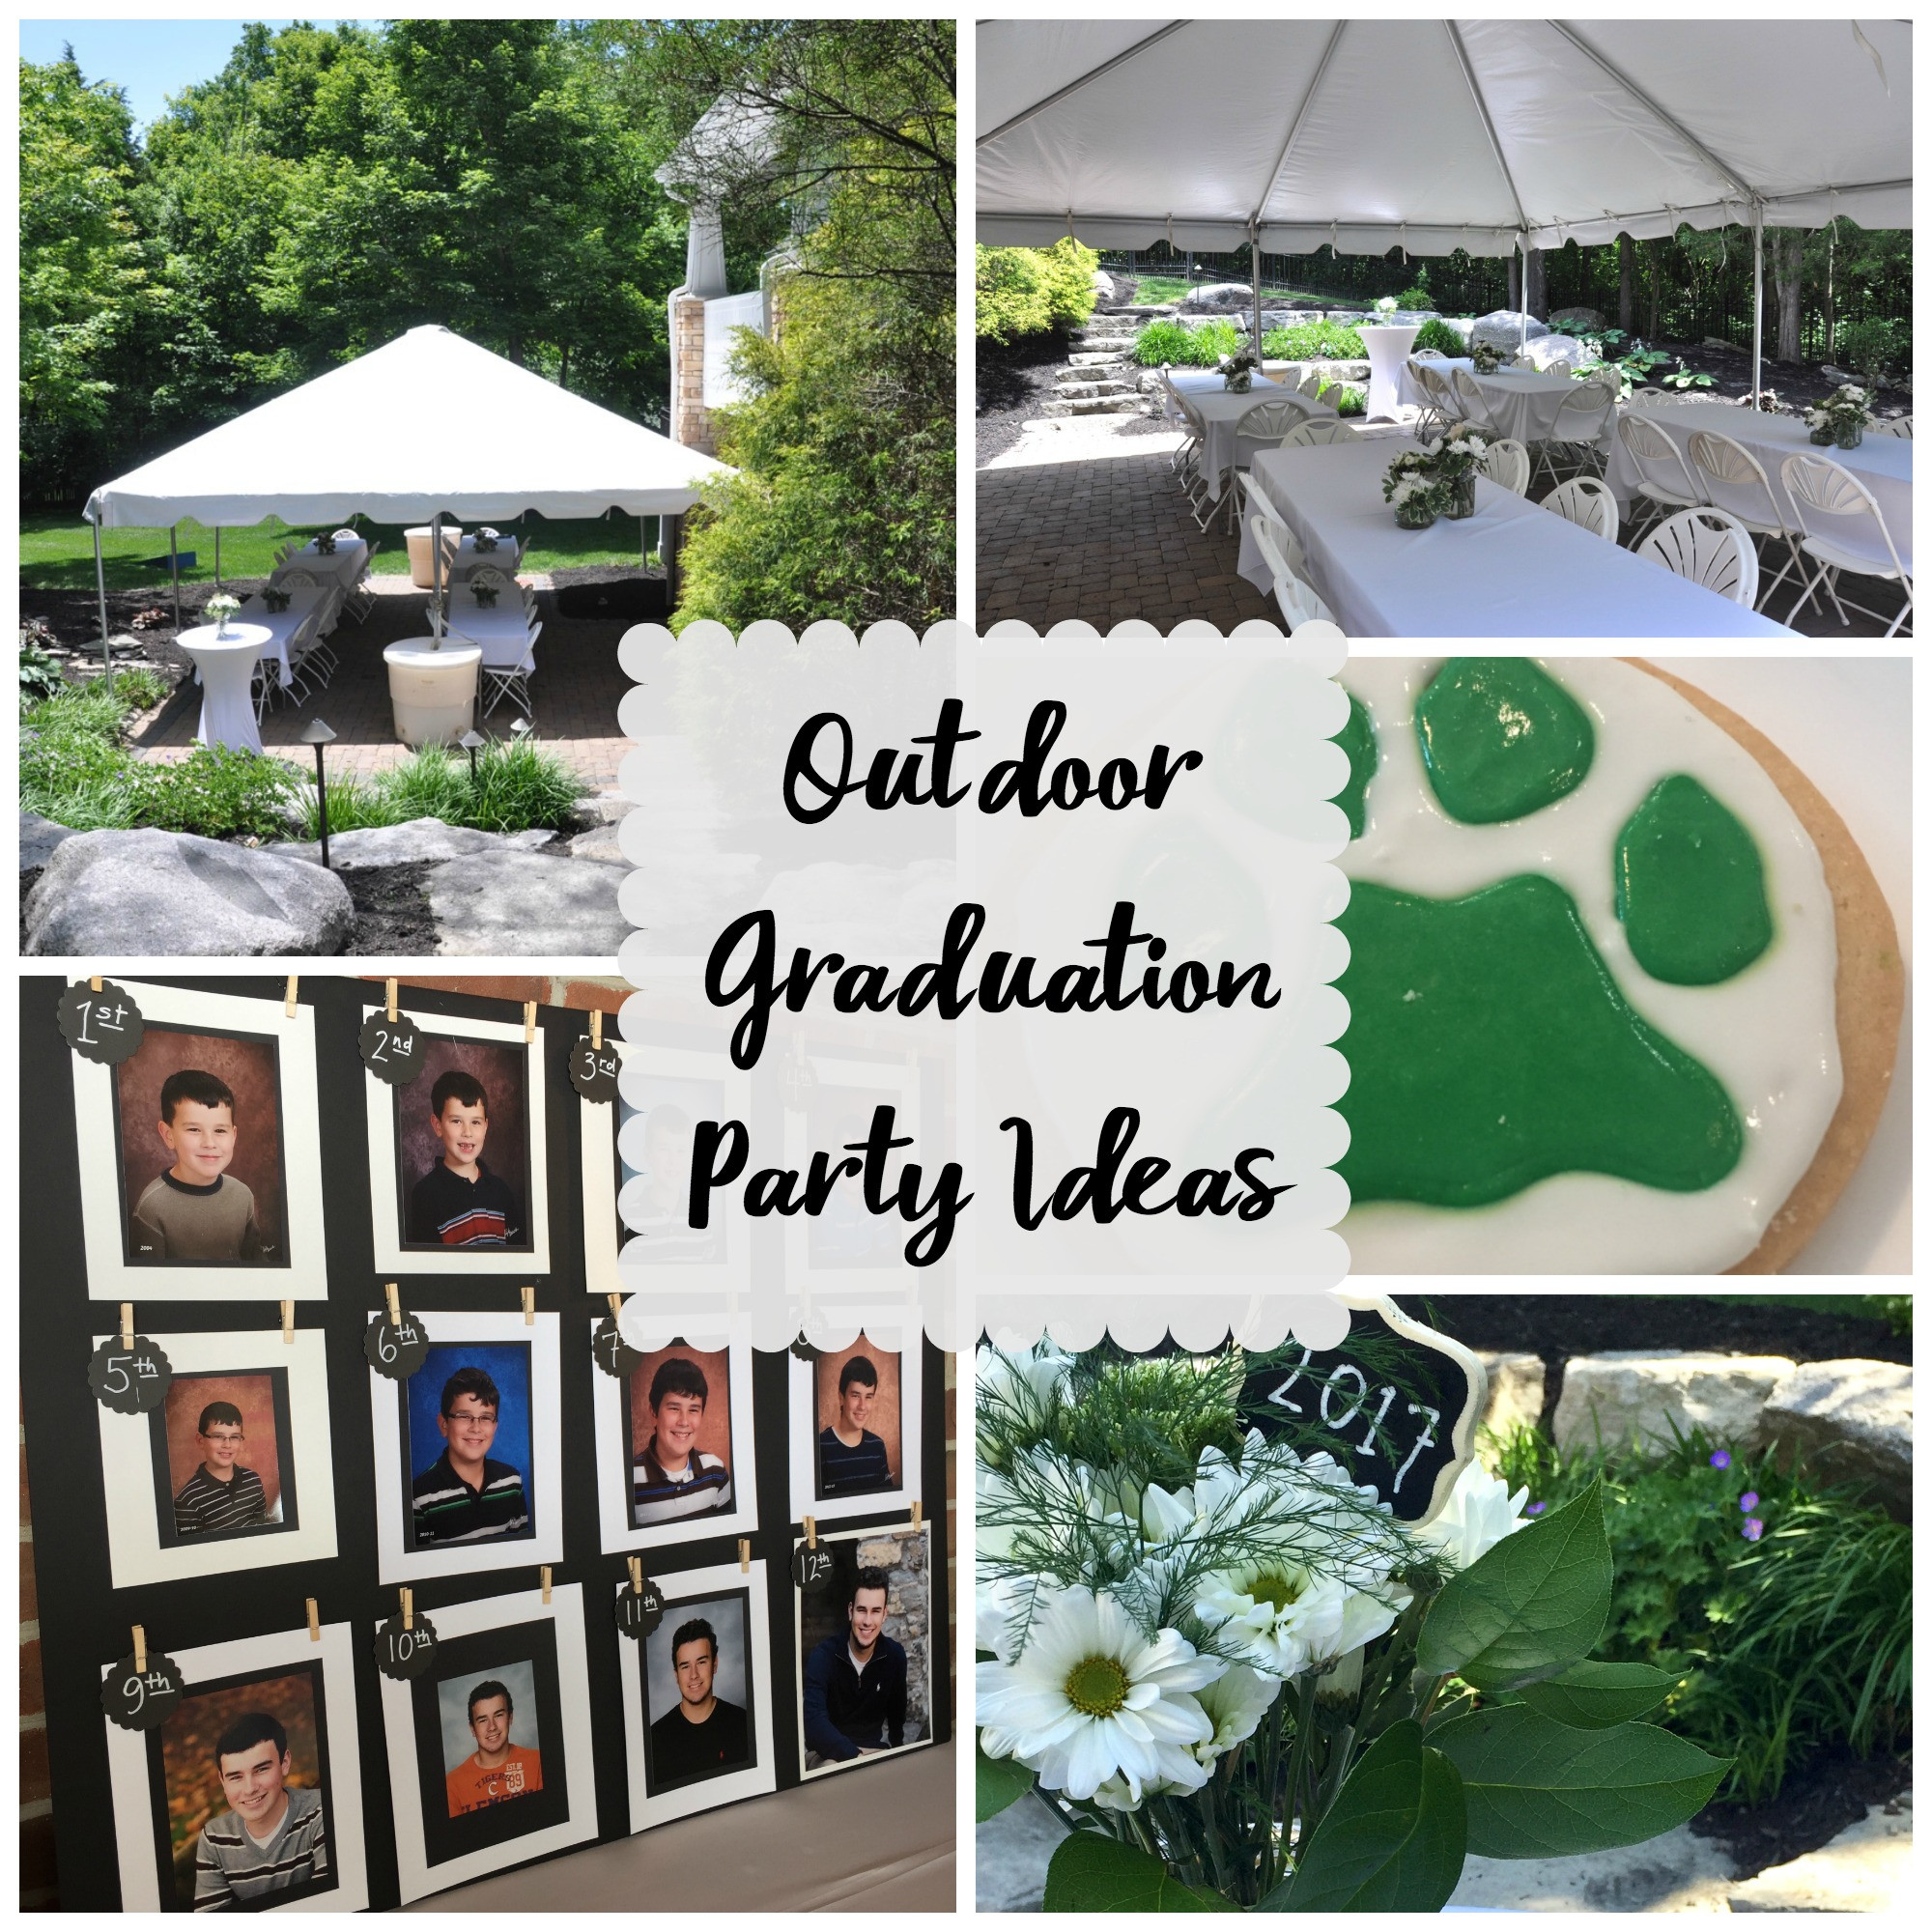 Graduation Party Ideas For Backyard
 Outdoor Graduation Party Evolution of Style